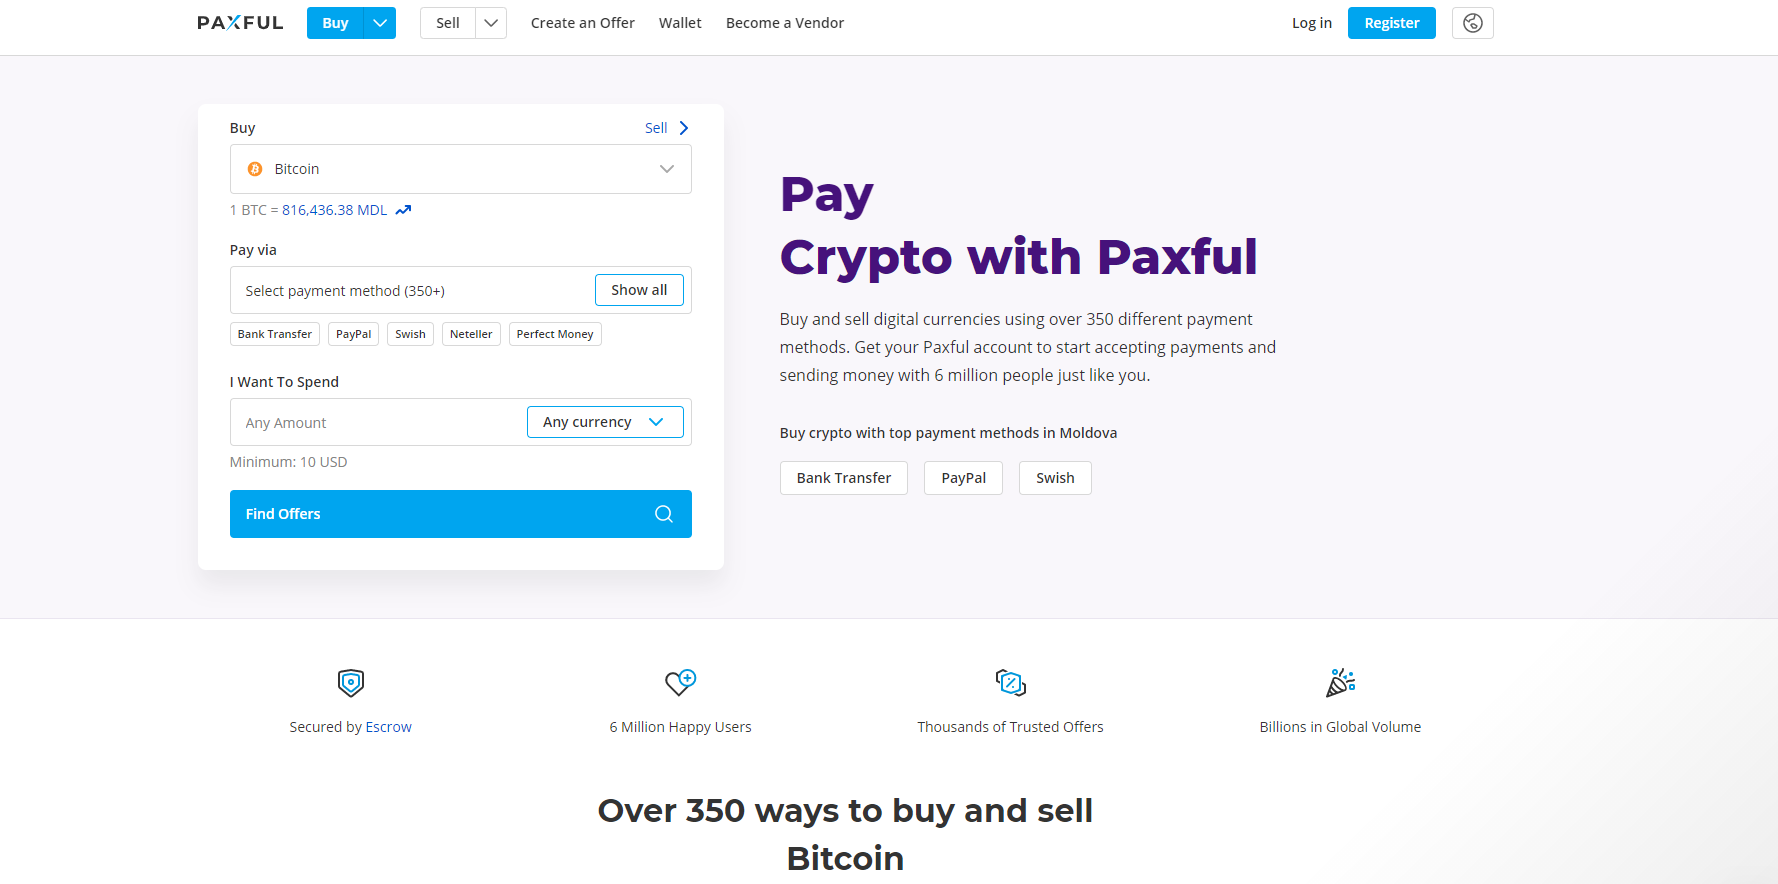 paxful website preview 2021